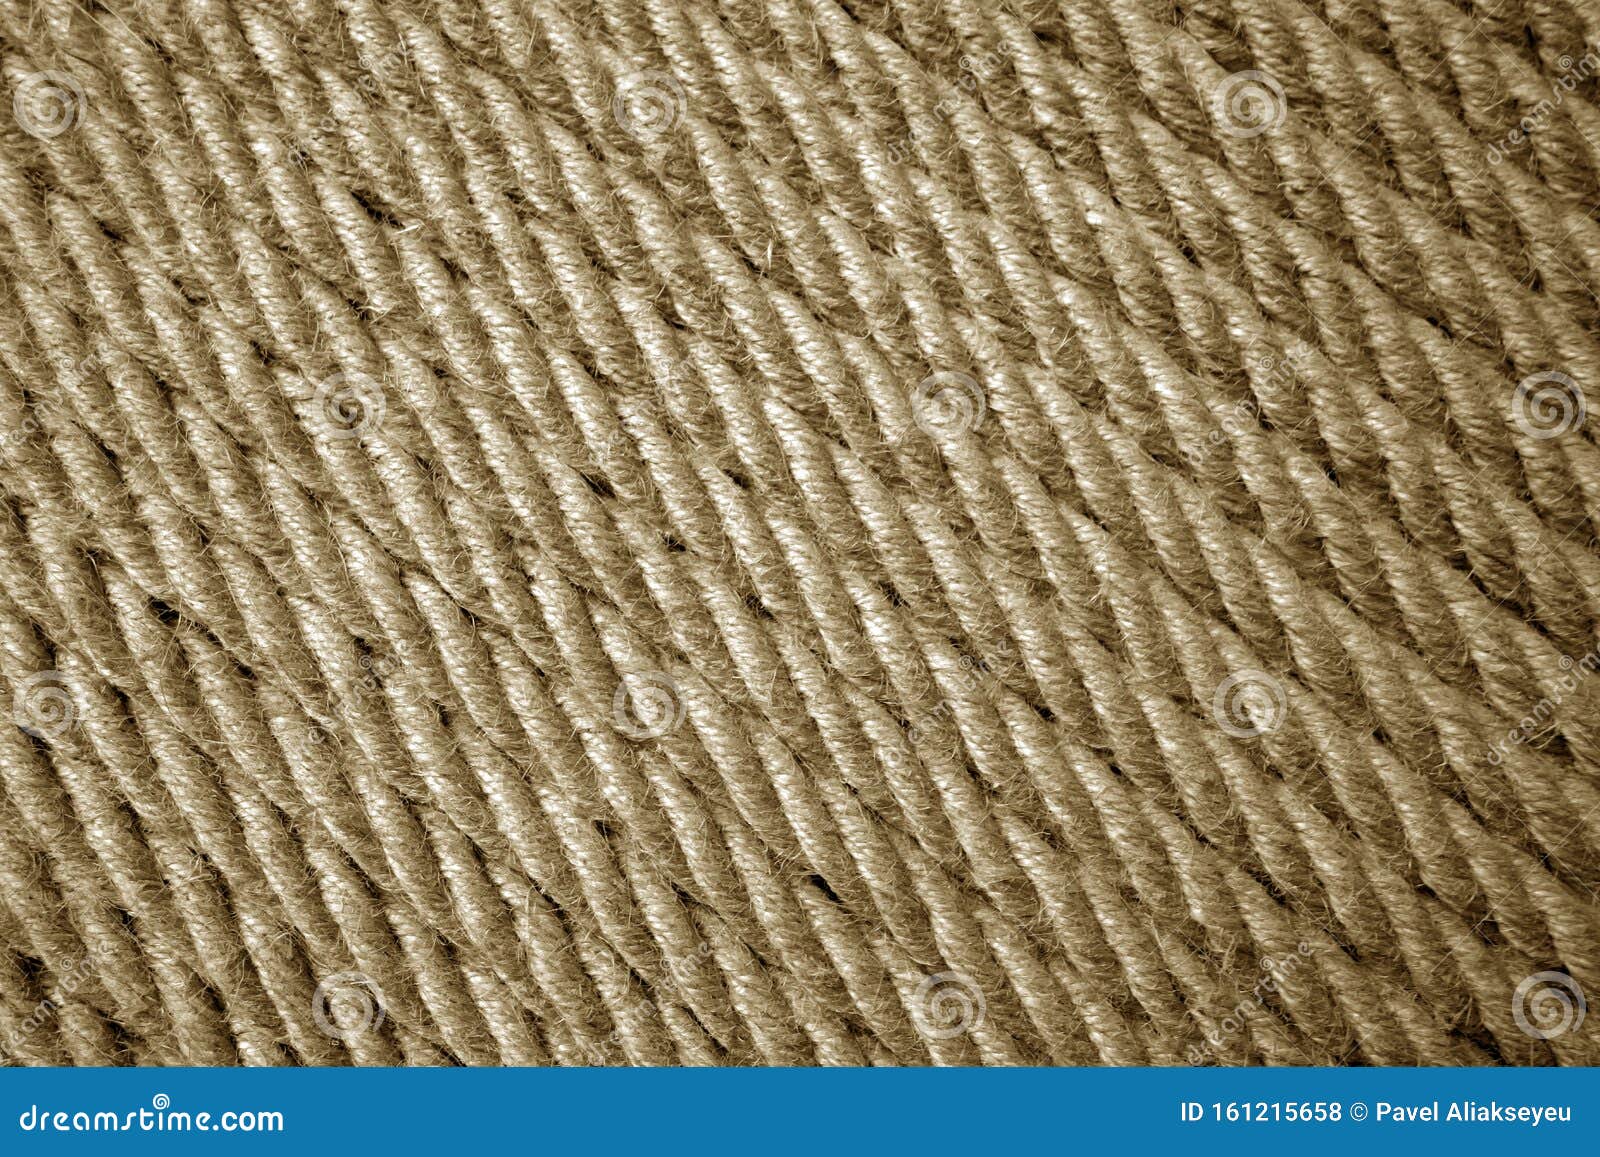 Jute Rope Pattern in Brown Color Stock Photo - Image of material